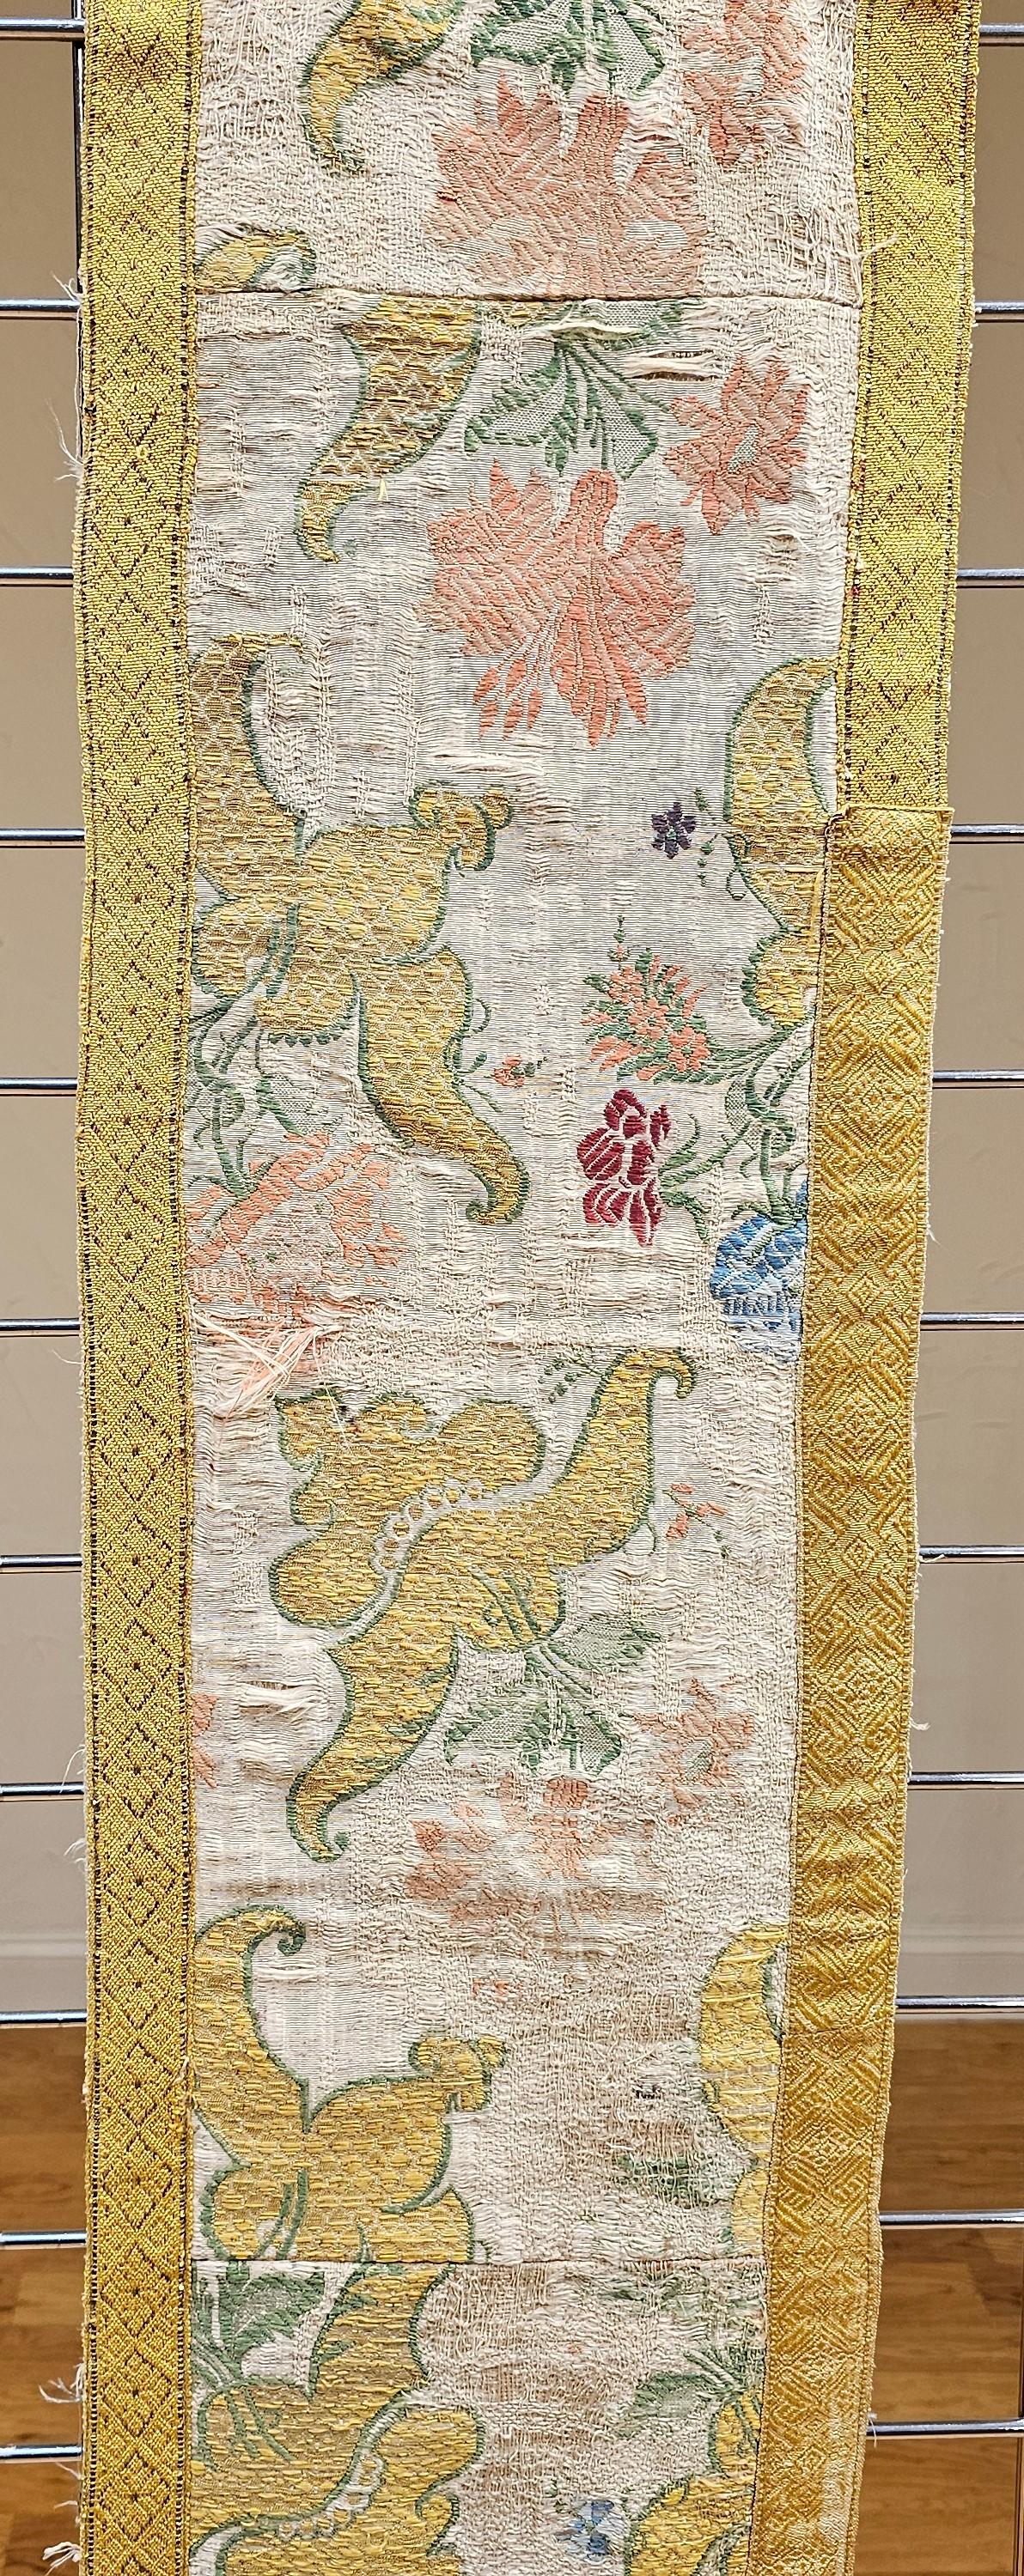 Hand-Crafted 18th Century European Hand Embroidered Silk and Gilt Threads Textile Panel For Sale